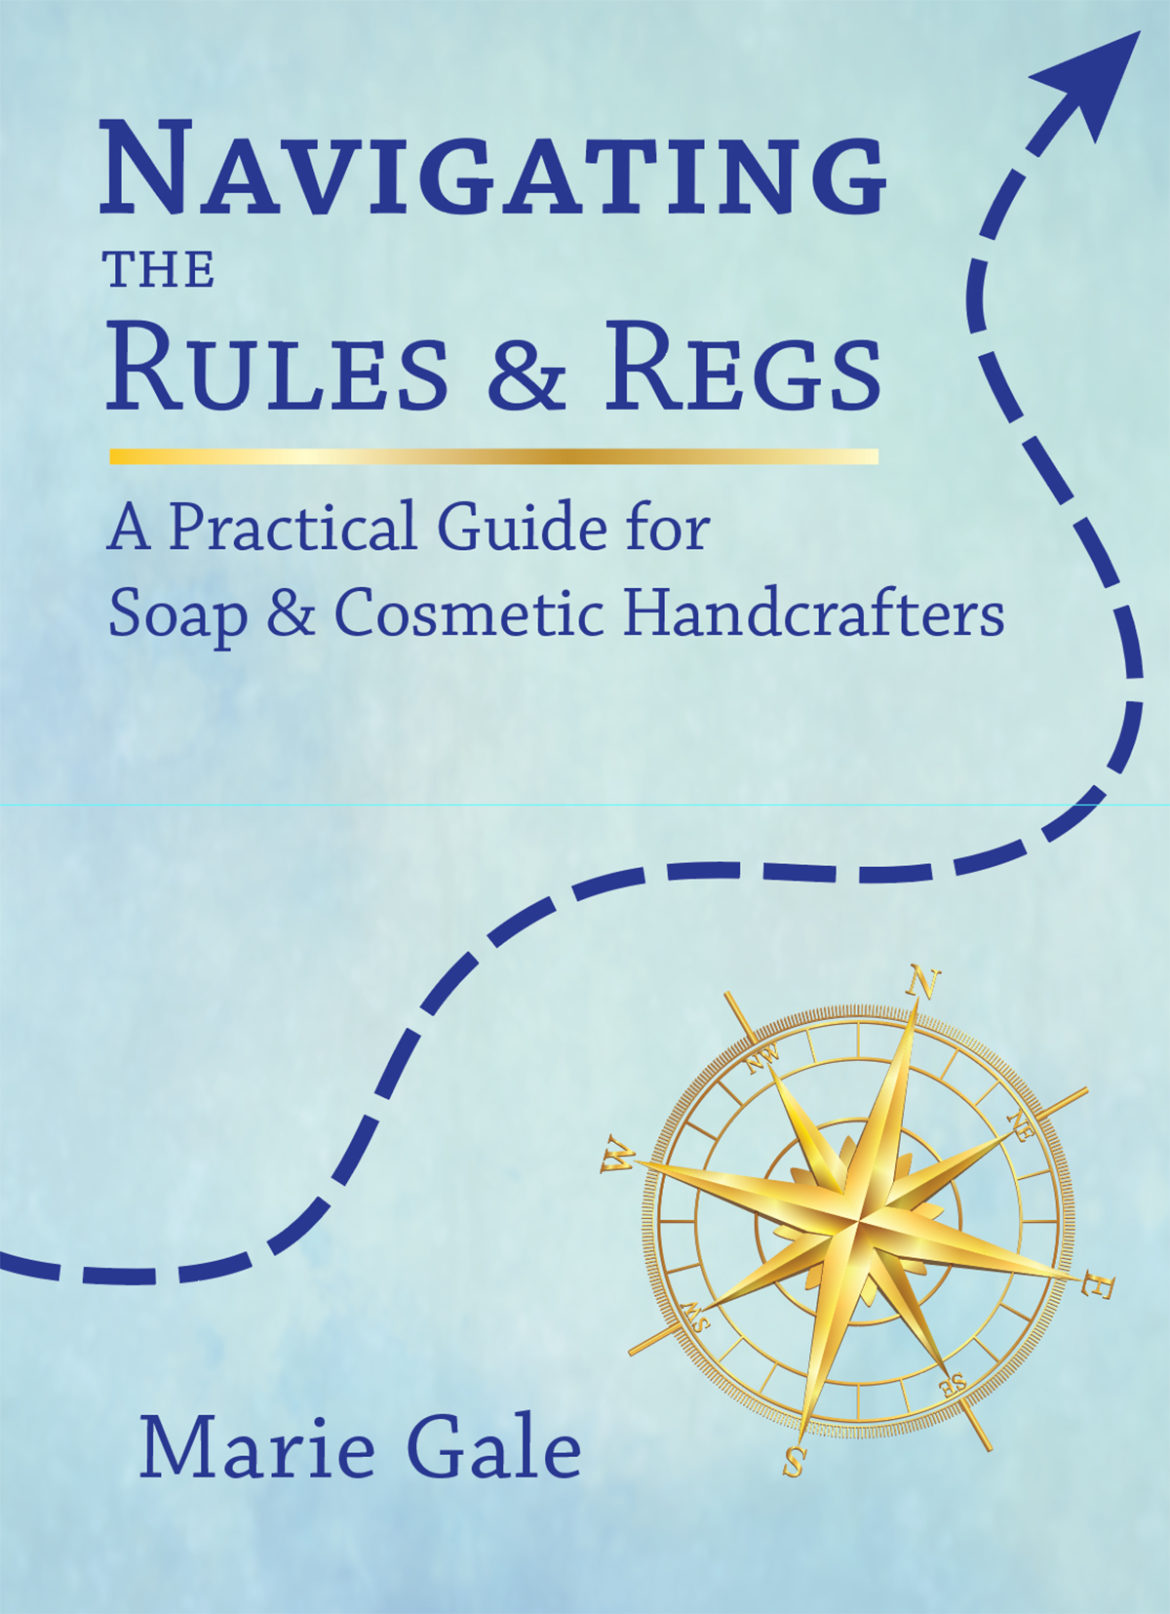 New Book! Navigating the Rules & Regs